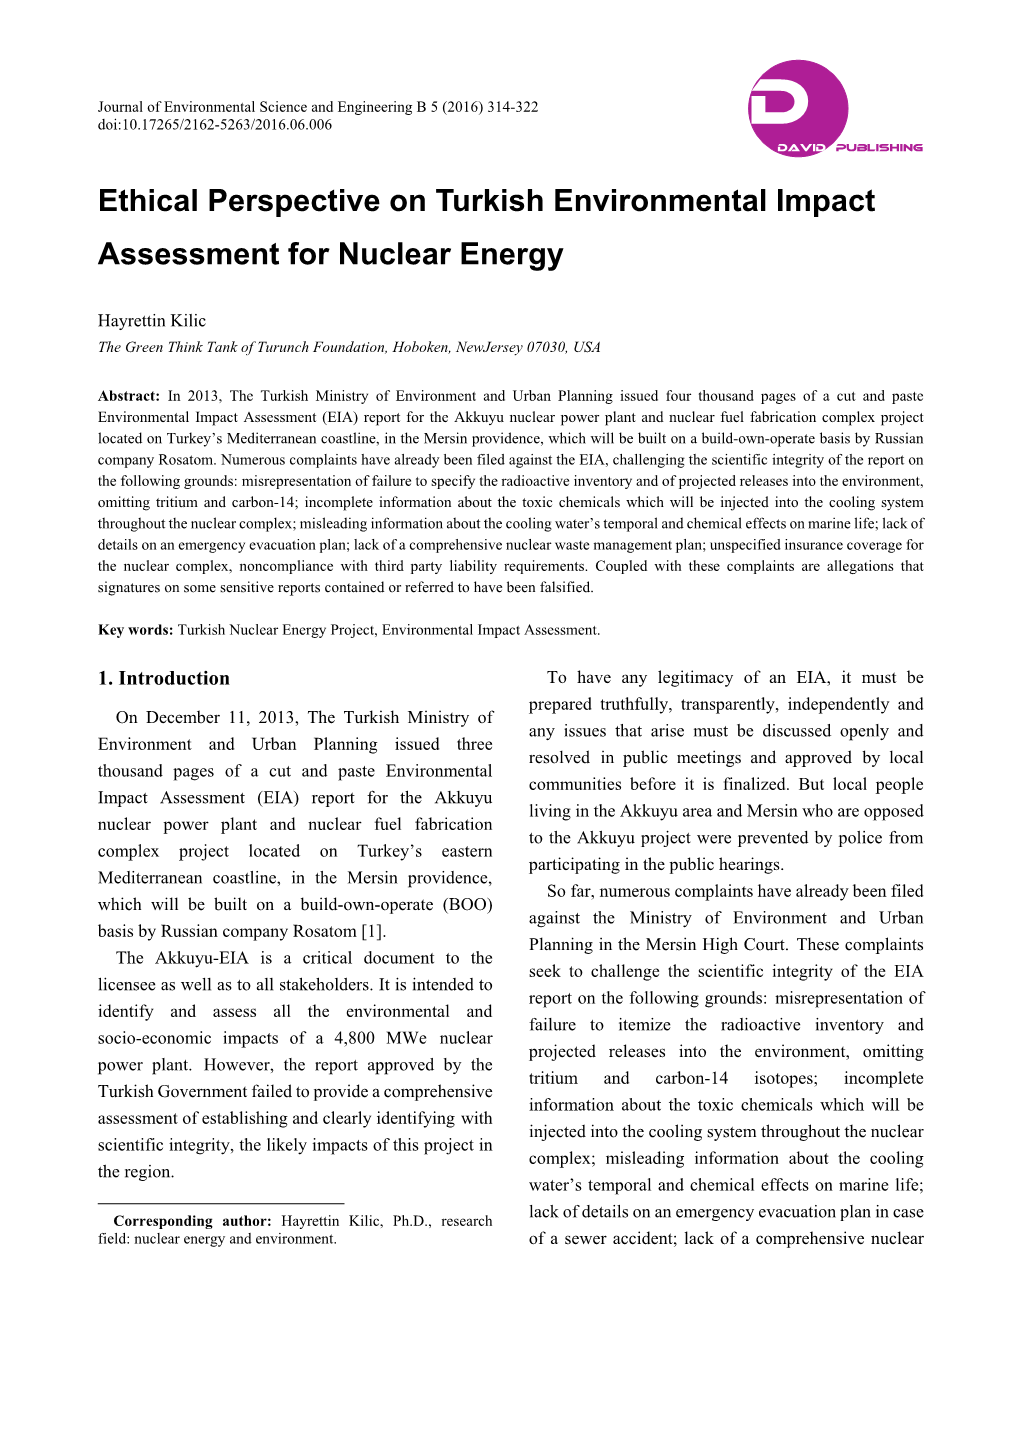 Ethical Perspective on Turkish Environmental Impact Assessment for Nuclear Energy